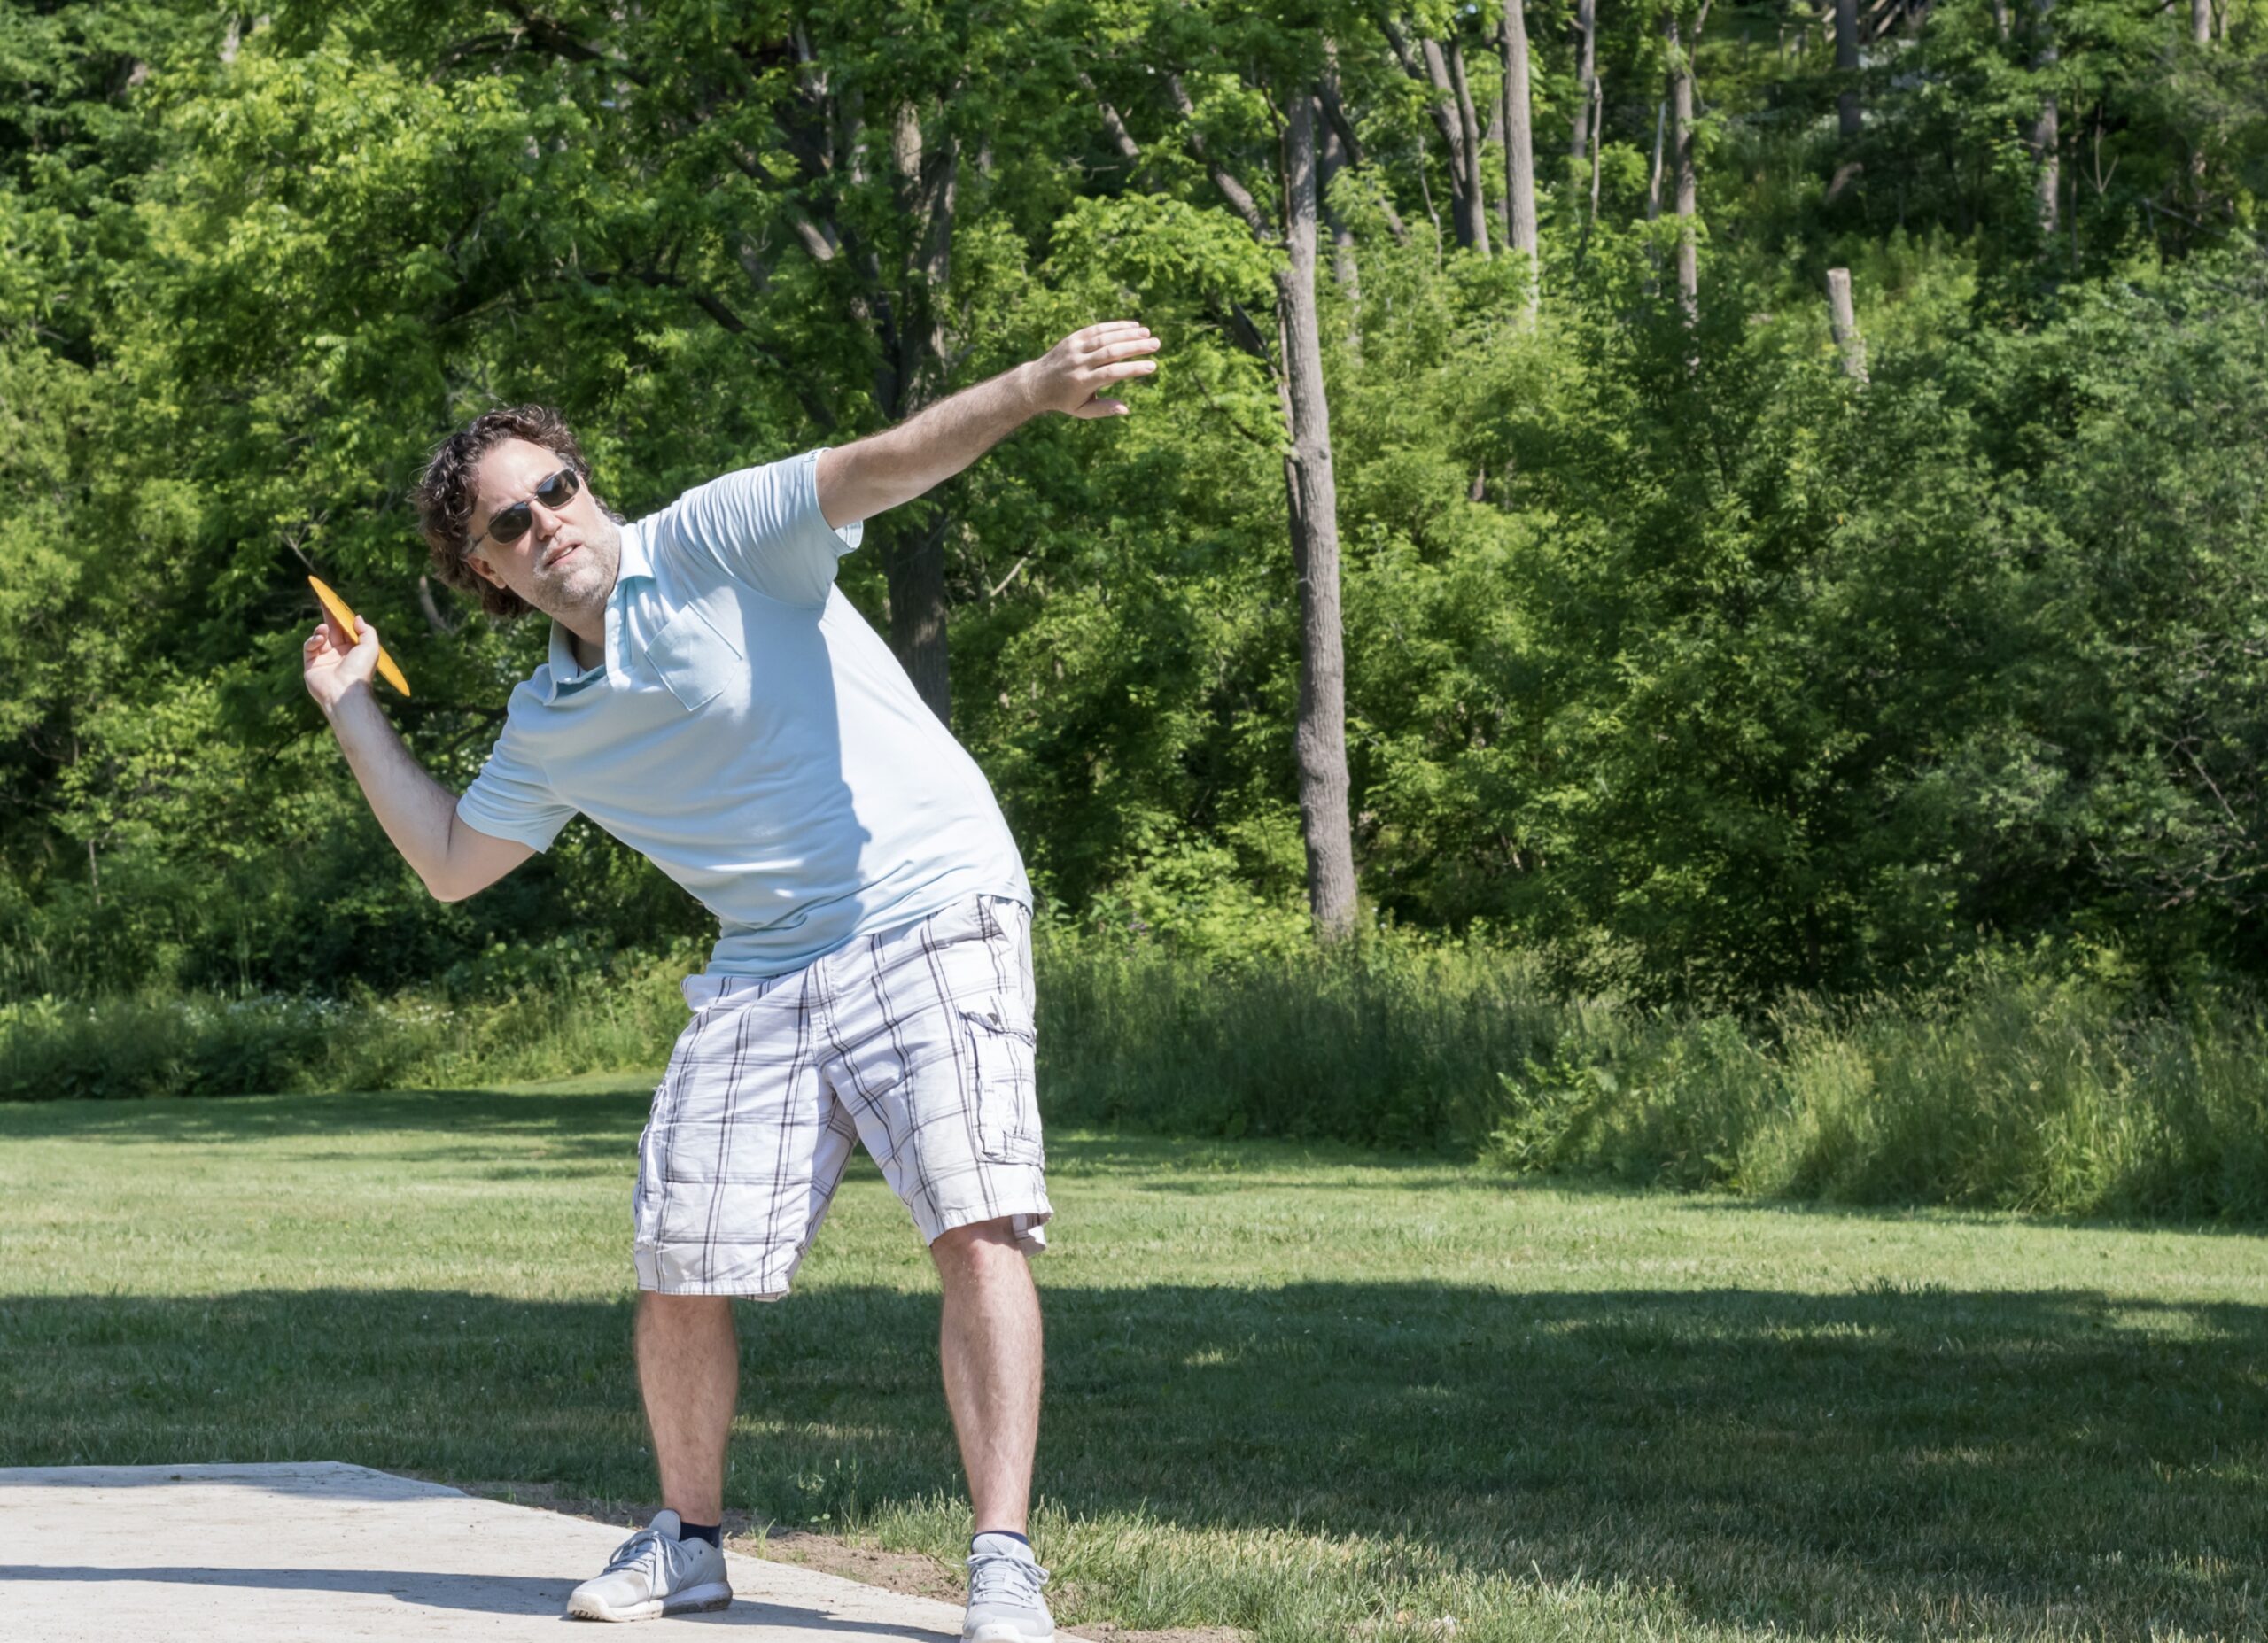 Disc Golf 101: Thumber and Tomahawk Shots